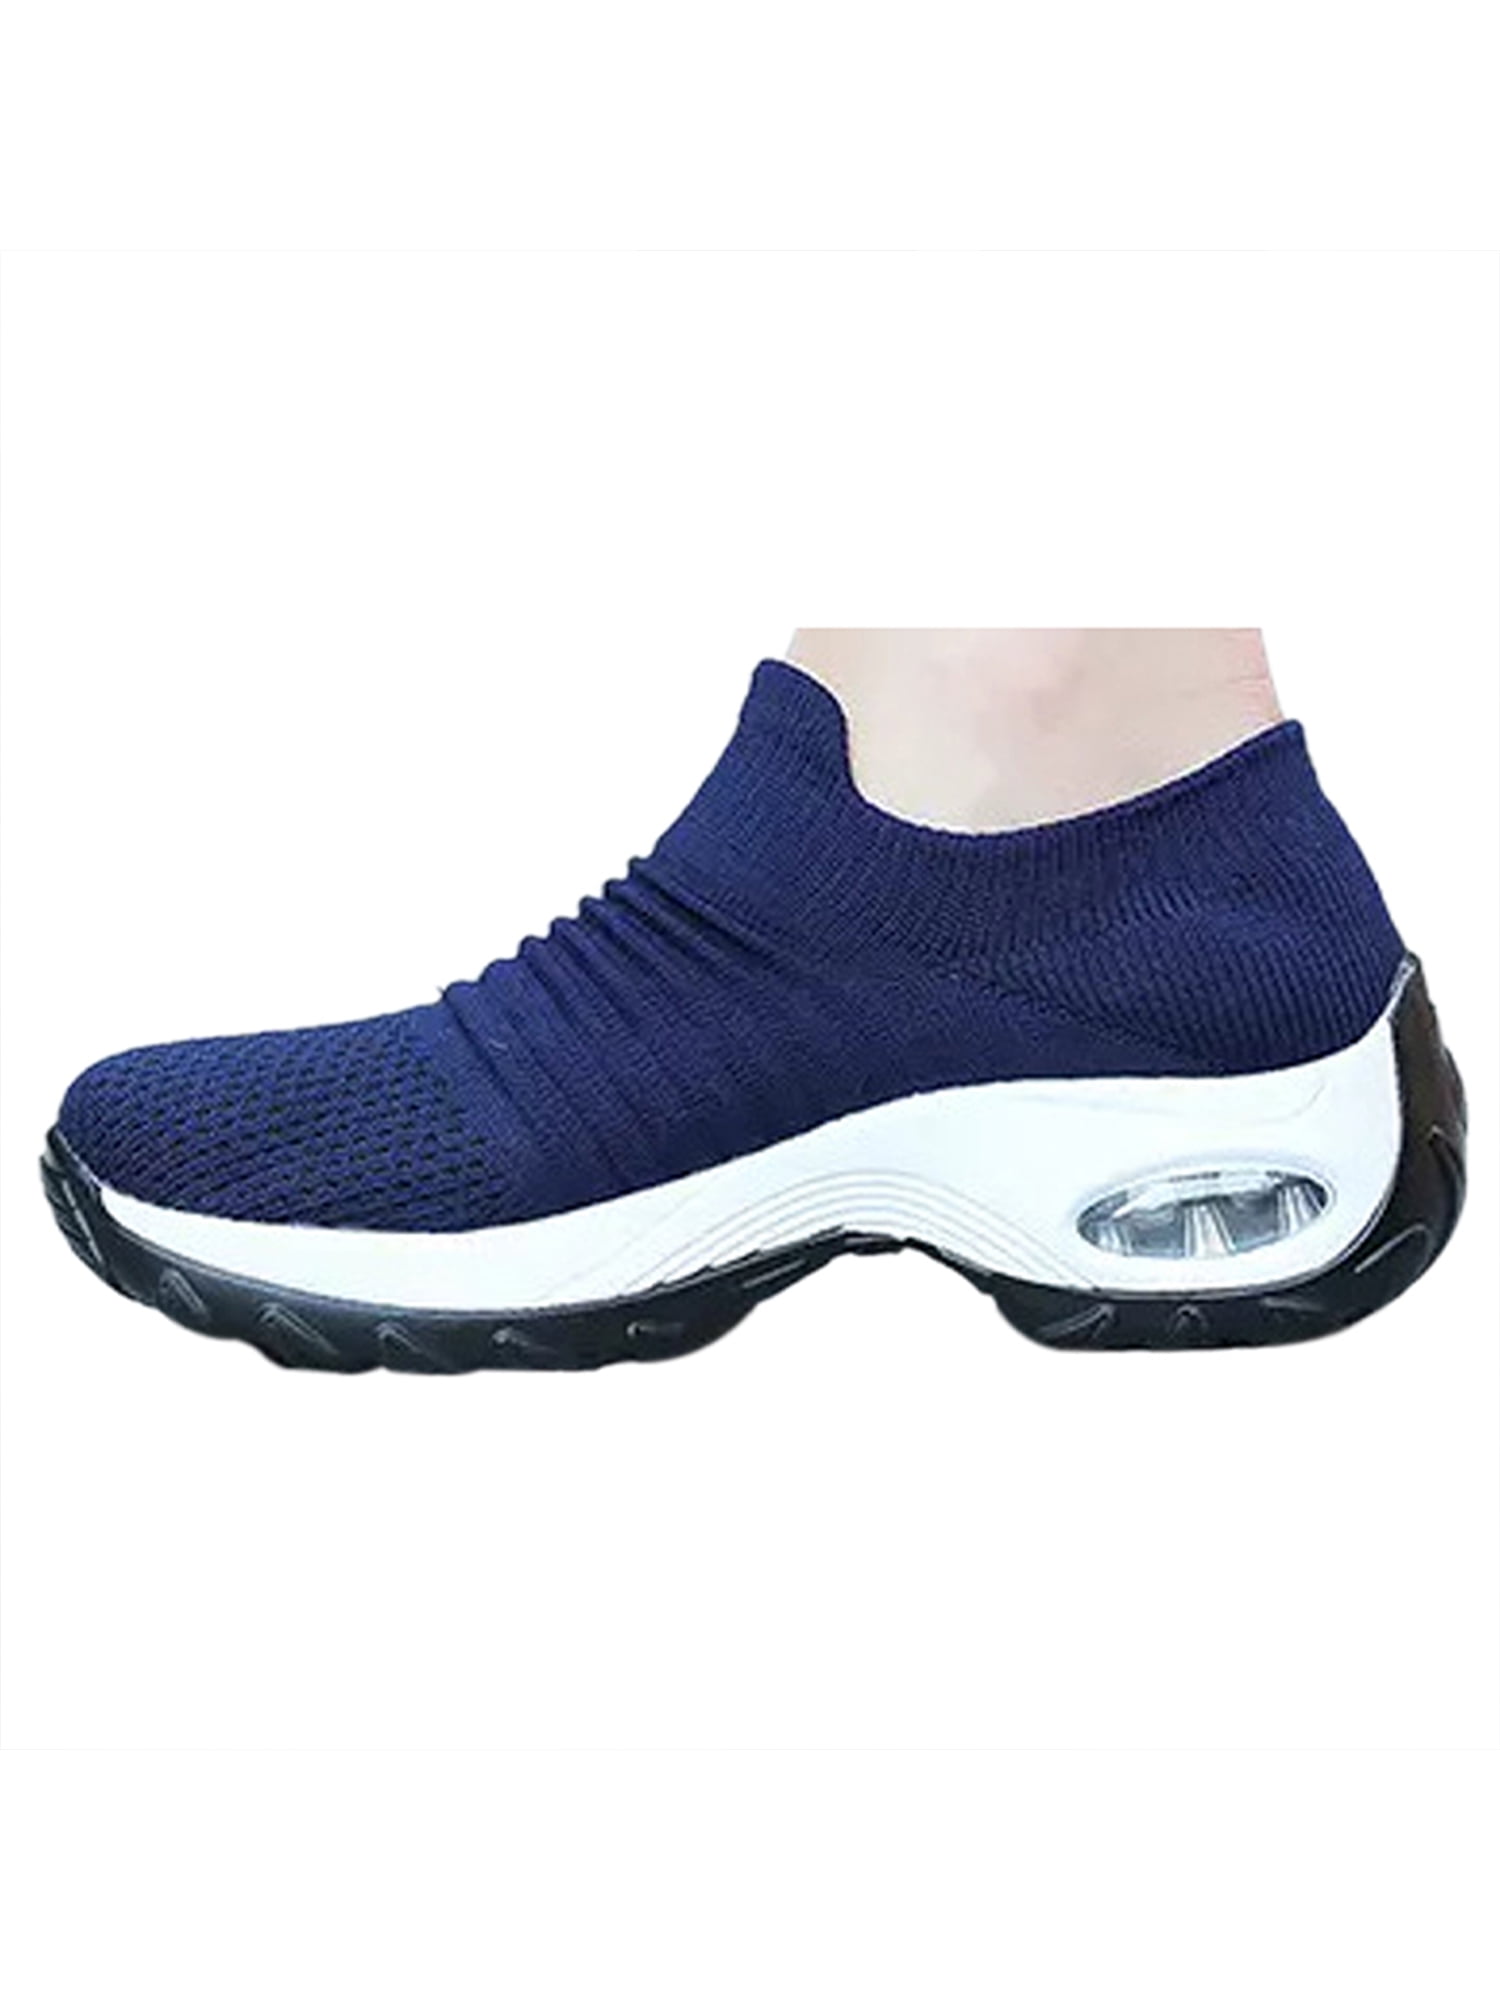 Funnie Womens Running Sports Shoes Air Cushion Mesh Shoes Casual Slip-On Breathable Lightweight Gym Platform Shoes Walking Shoes Sneakers Hidden Wedges Shoes Outdoor Trainers Shoes 